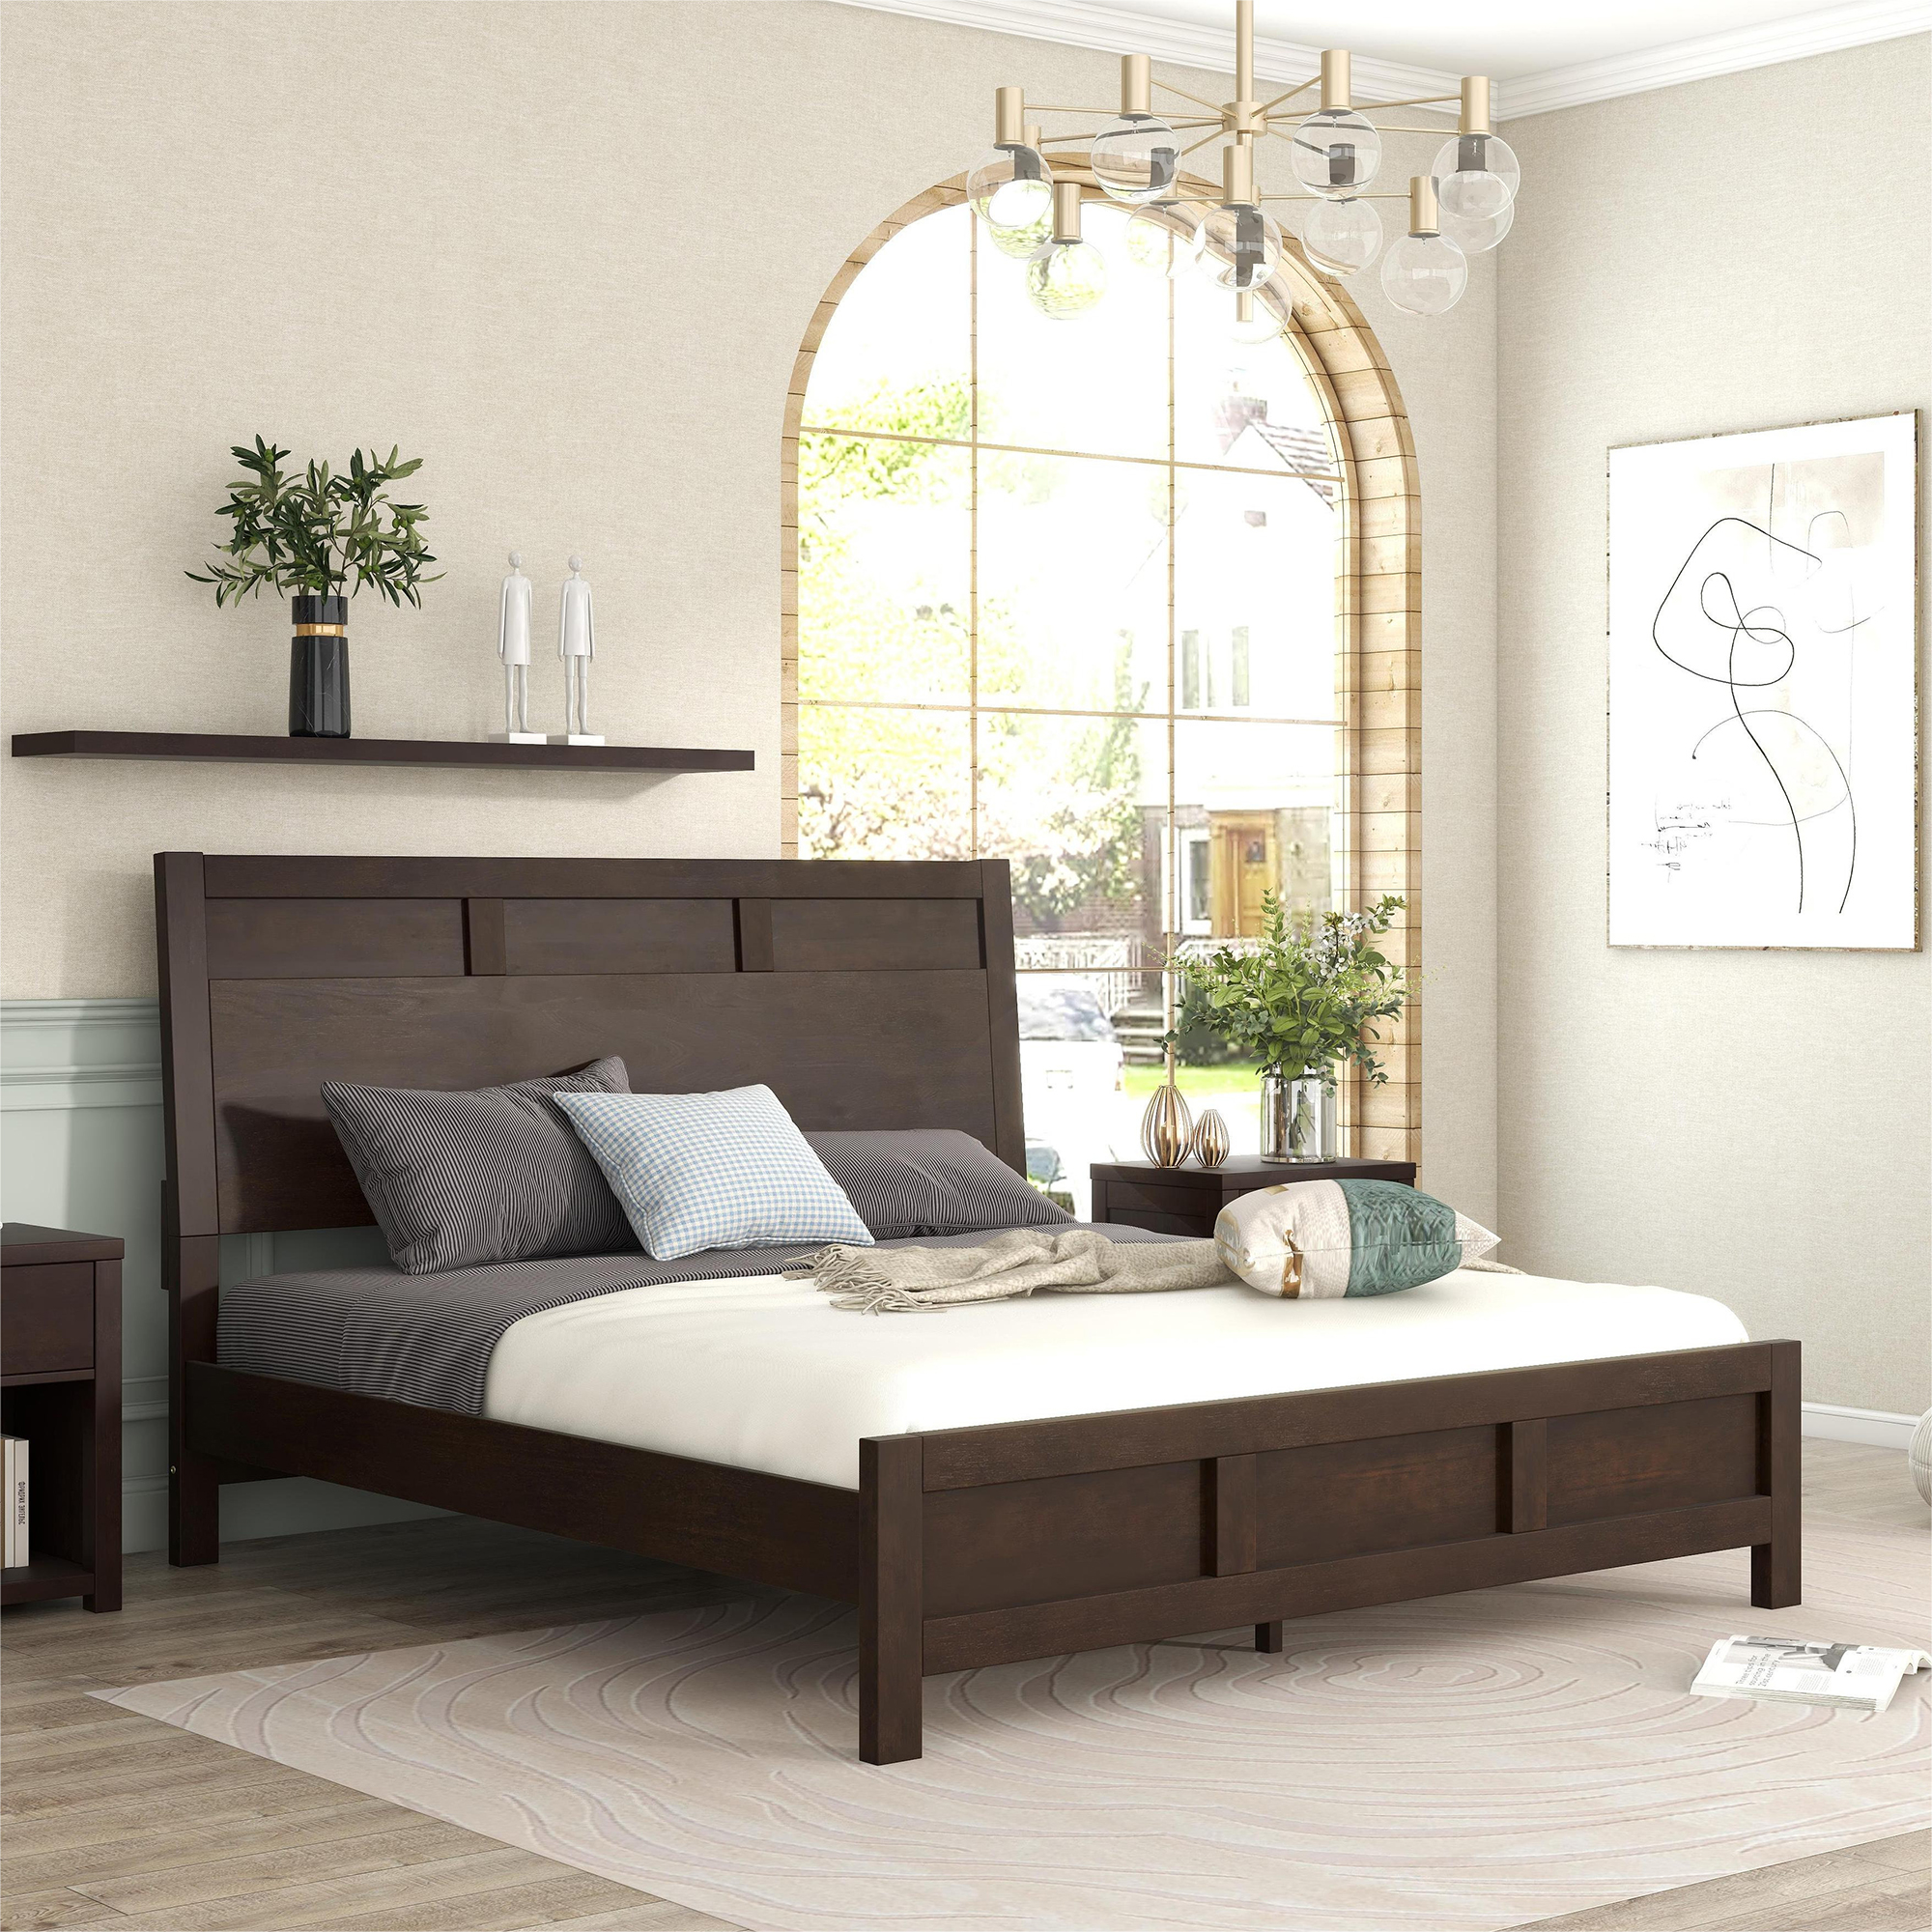 Classic Rich Brown 3 Pieces King Bedroom Set - BS300491AAP